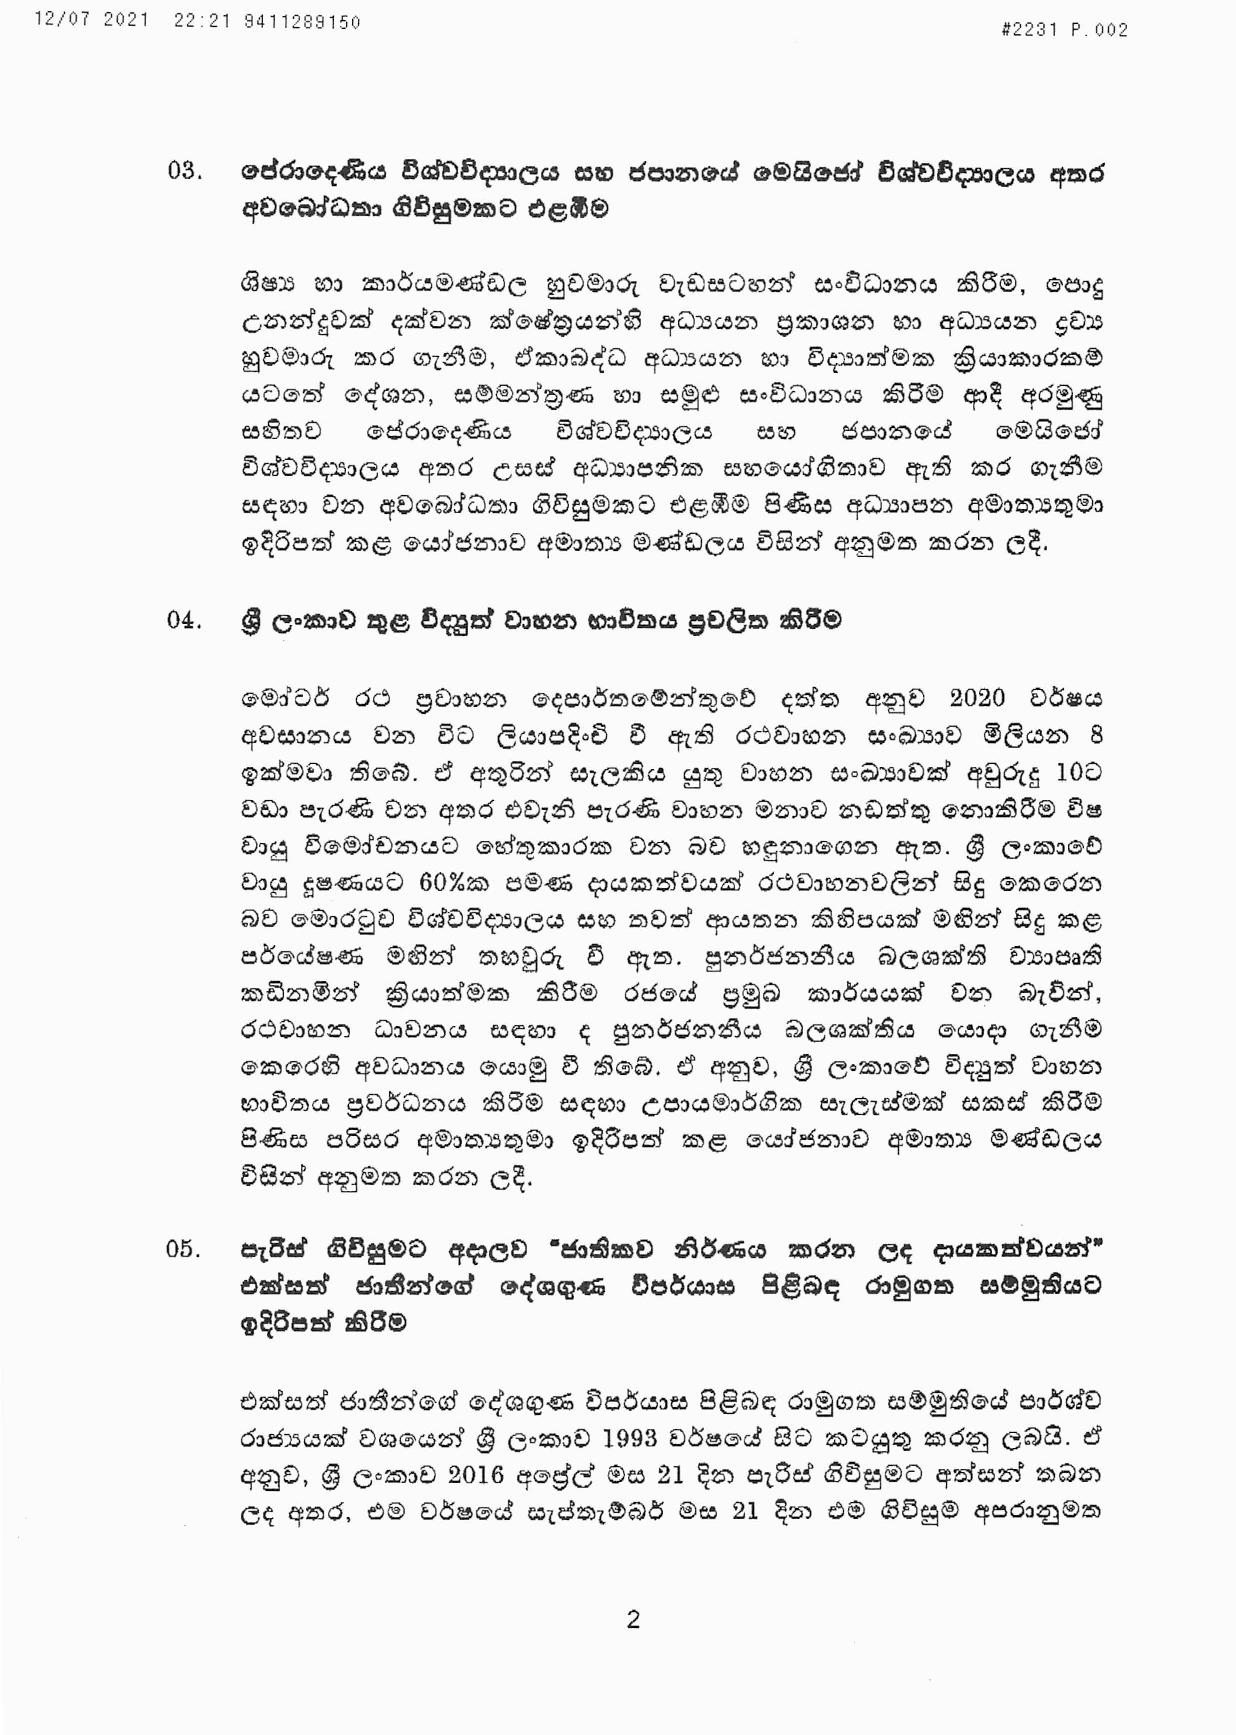 Cabinet Decision on 12.07.2021 page 002